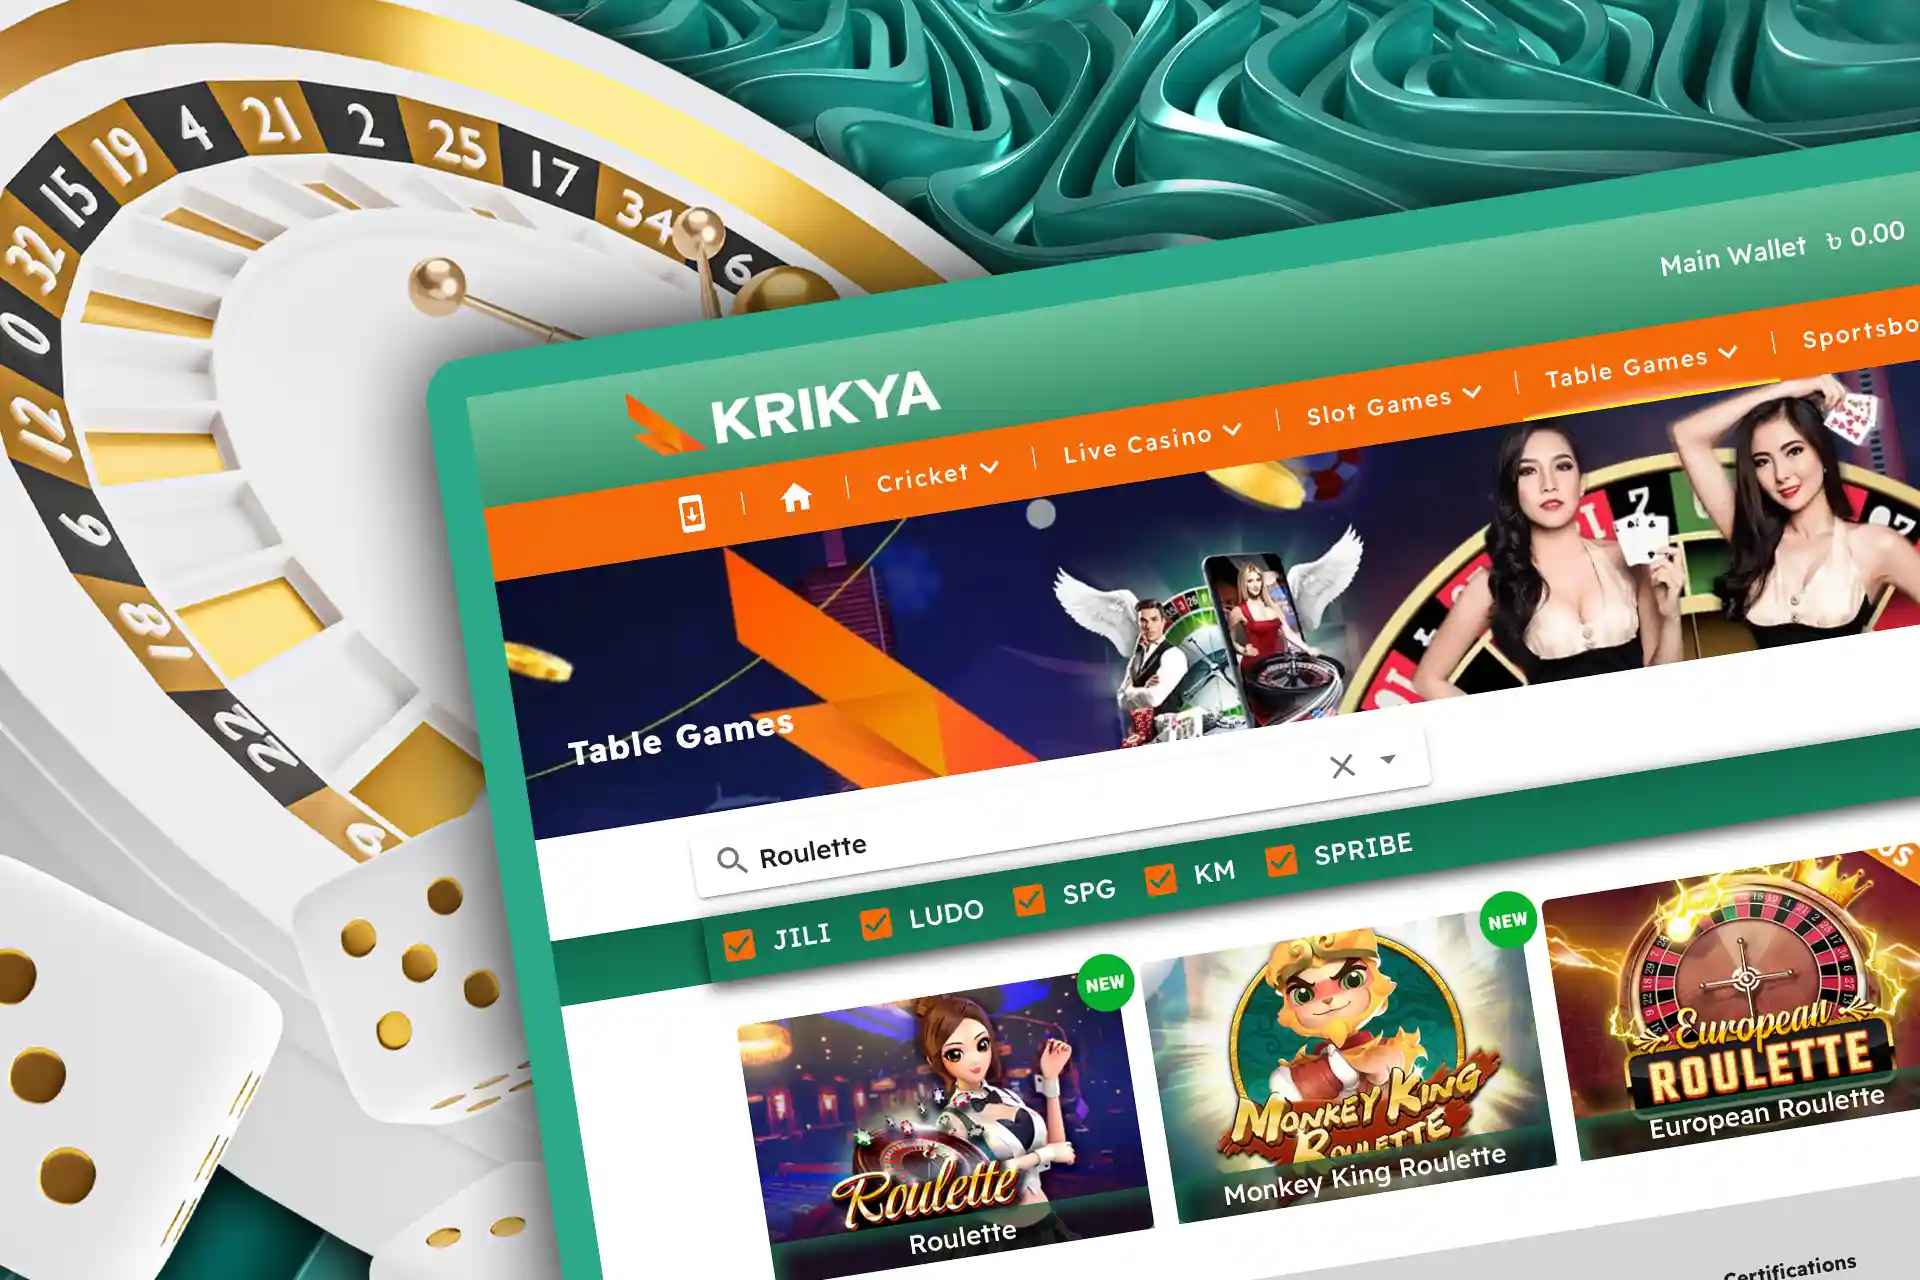 There are european and other roulettes in the Krikya casino.